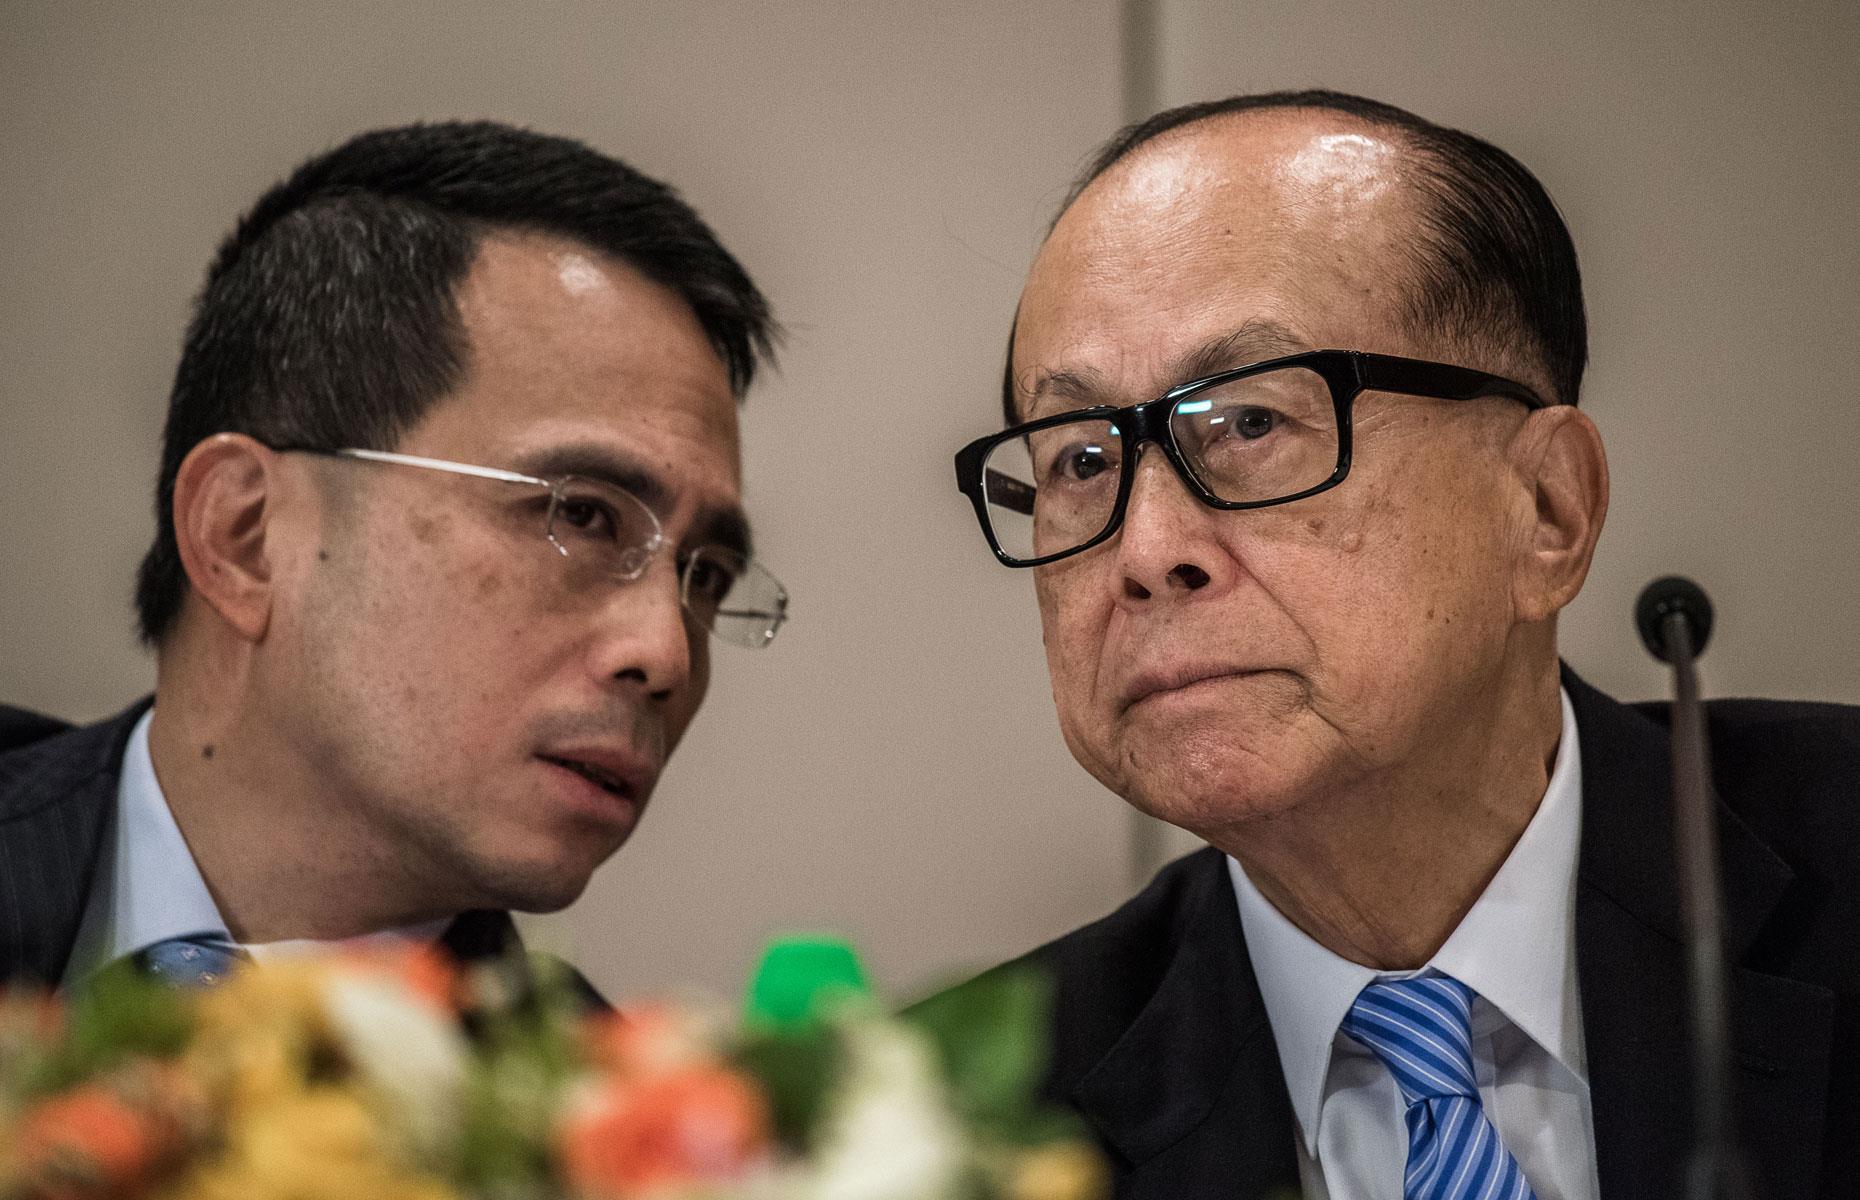 <p>The Hong Kong-based Li family is up next. Li Ka-shing, nicknamed "Superman" for good reason, is a business genius who started plastics company Cheung Kong Industries in 1951 with modest savings and loans from relatives.</p>  <p>Over the years, the company evolved into CK Hutchison Holdings, one of Hong Kong's leading conglomerates. Li's son Victor (pictured here with his father), is chairman and co-CEO of the group, while his brother Richard chairs investment vehicle Pacific Century Group. </p>  <p>The total net worth given here doesn’t include Victor Li, so the $40.8 billion figure is likely to be a modest estimate of the total wealth of this family of business magnates .</p>